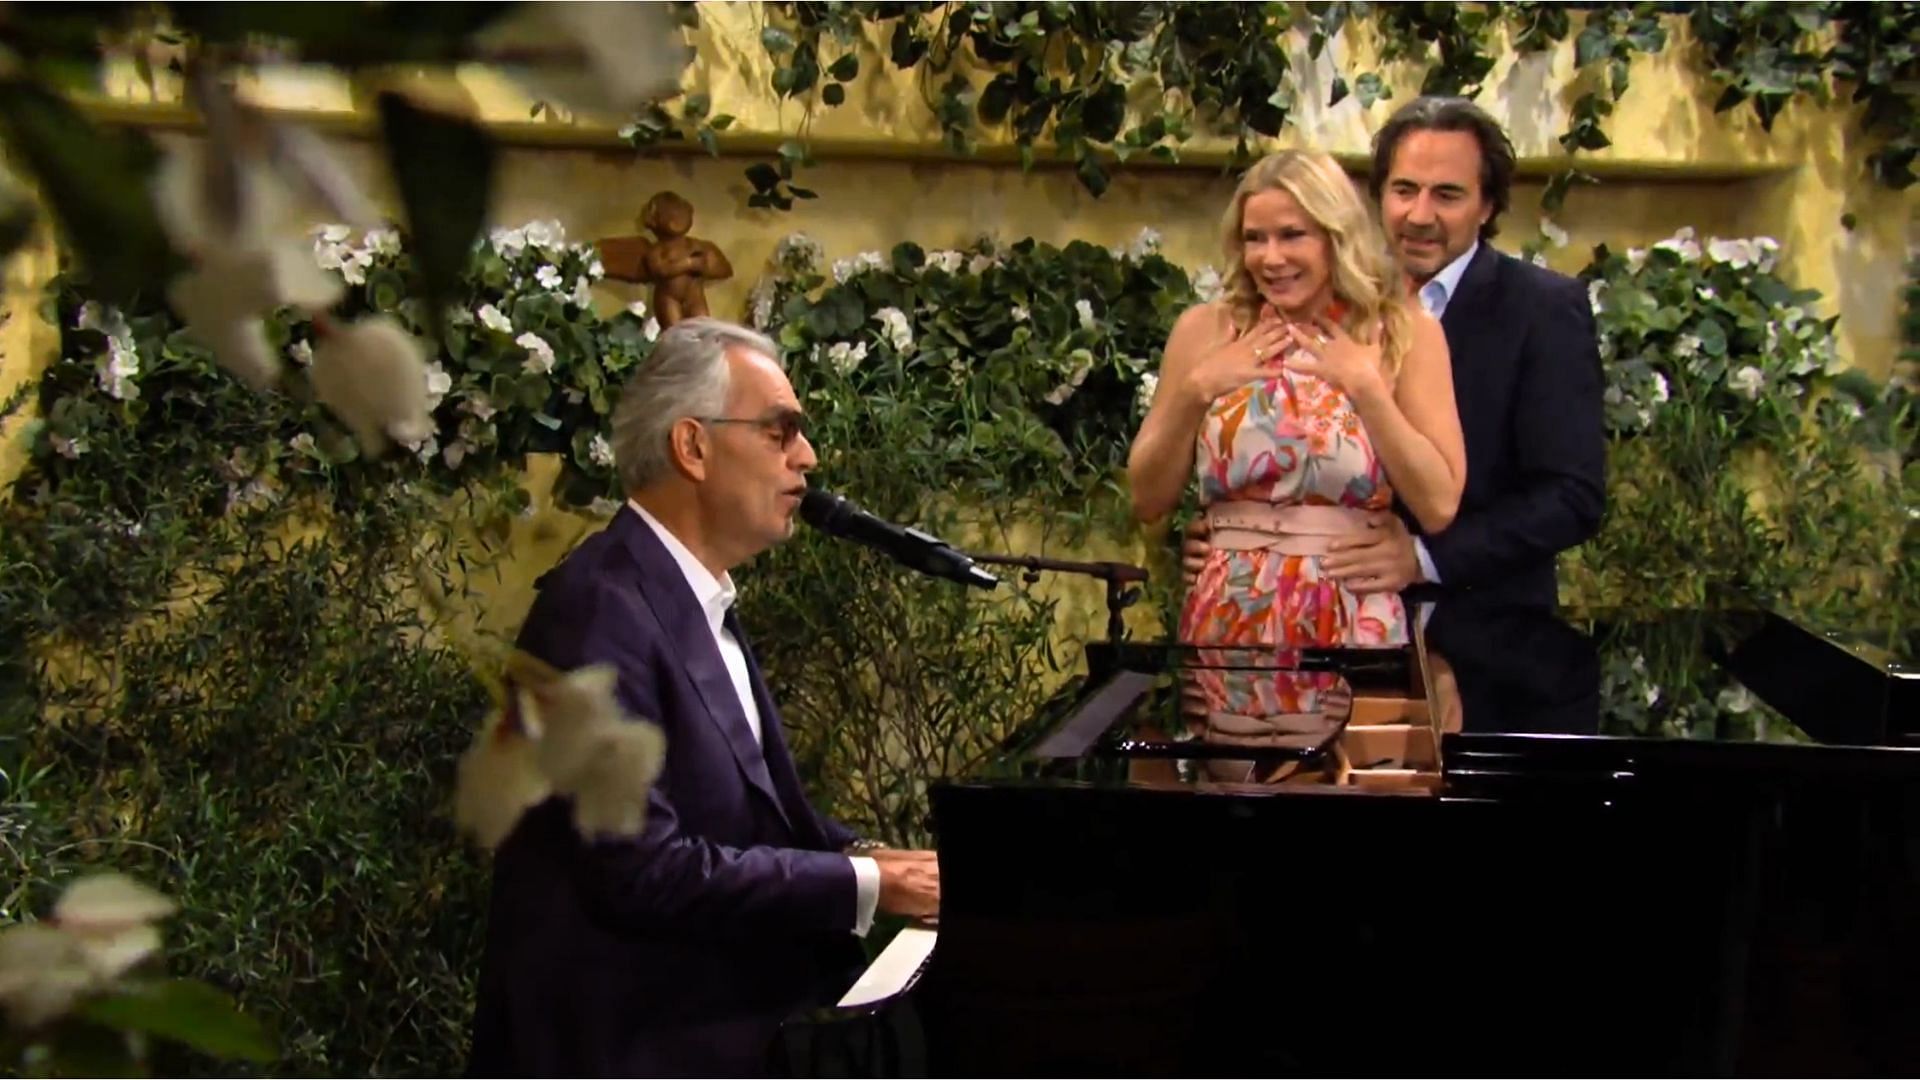 Andrea Bocelli performed in the show (Image via CBS)